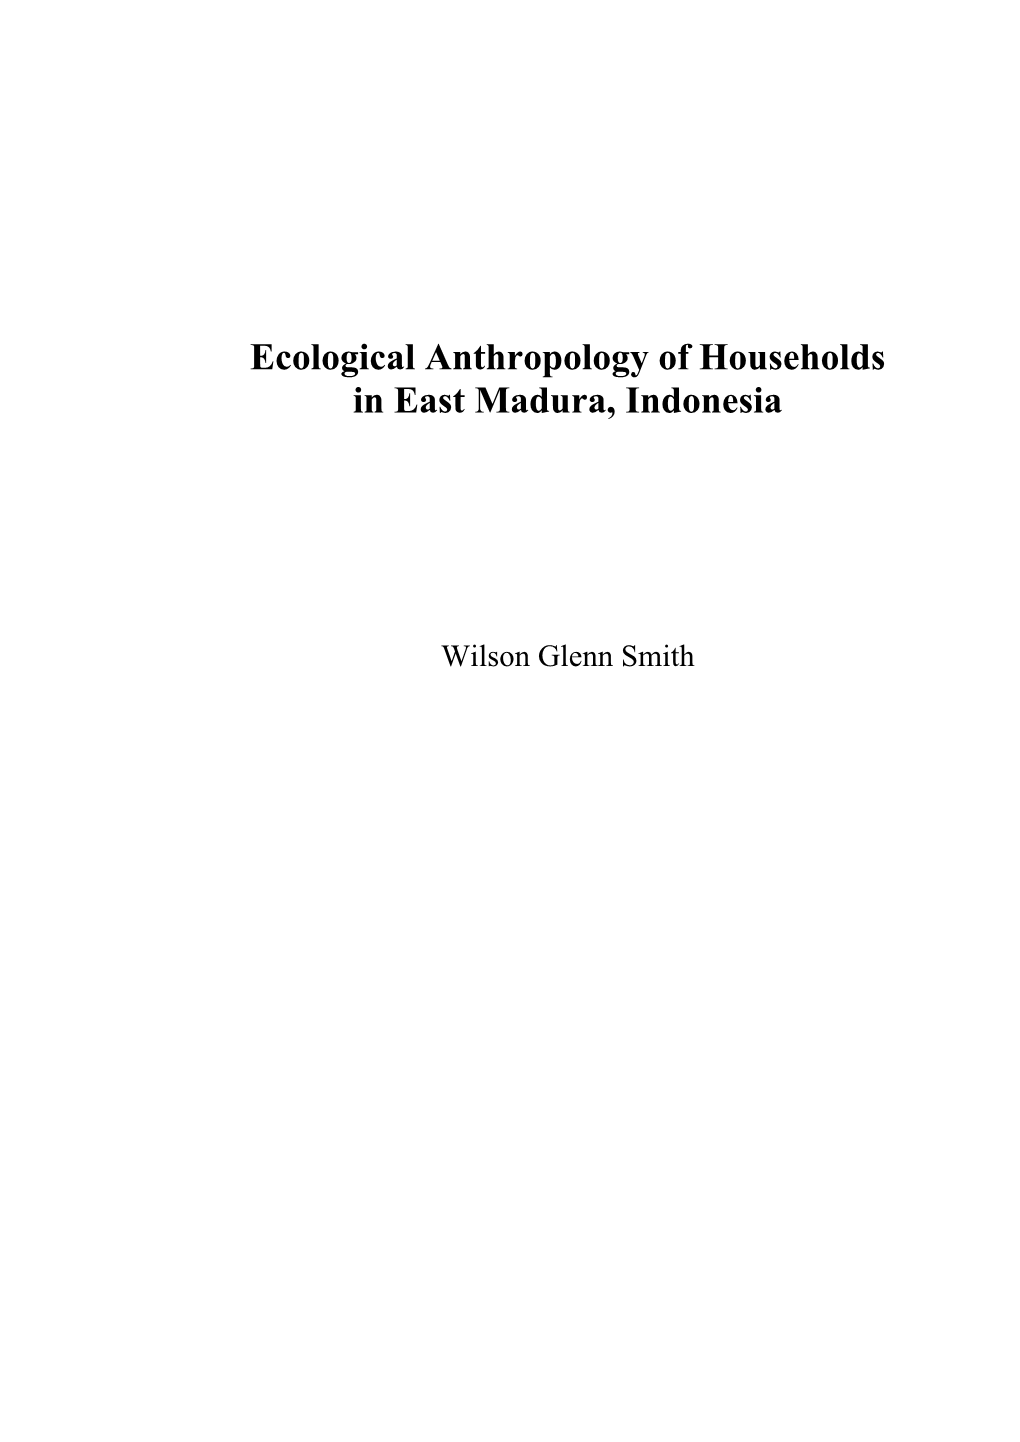 Ecological Anthropology of Households in East Madura, Indonesia